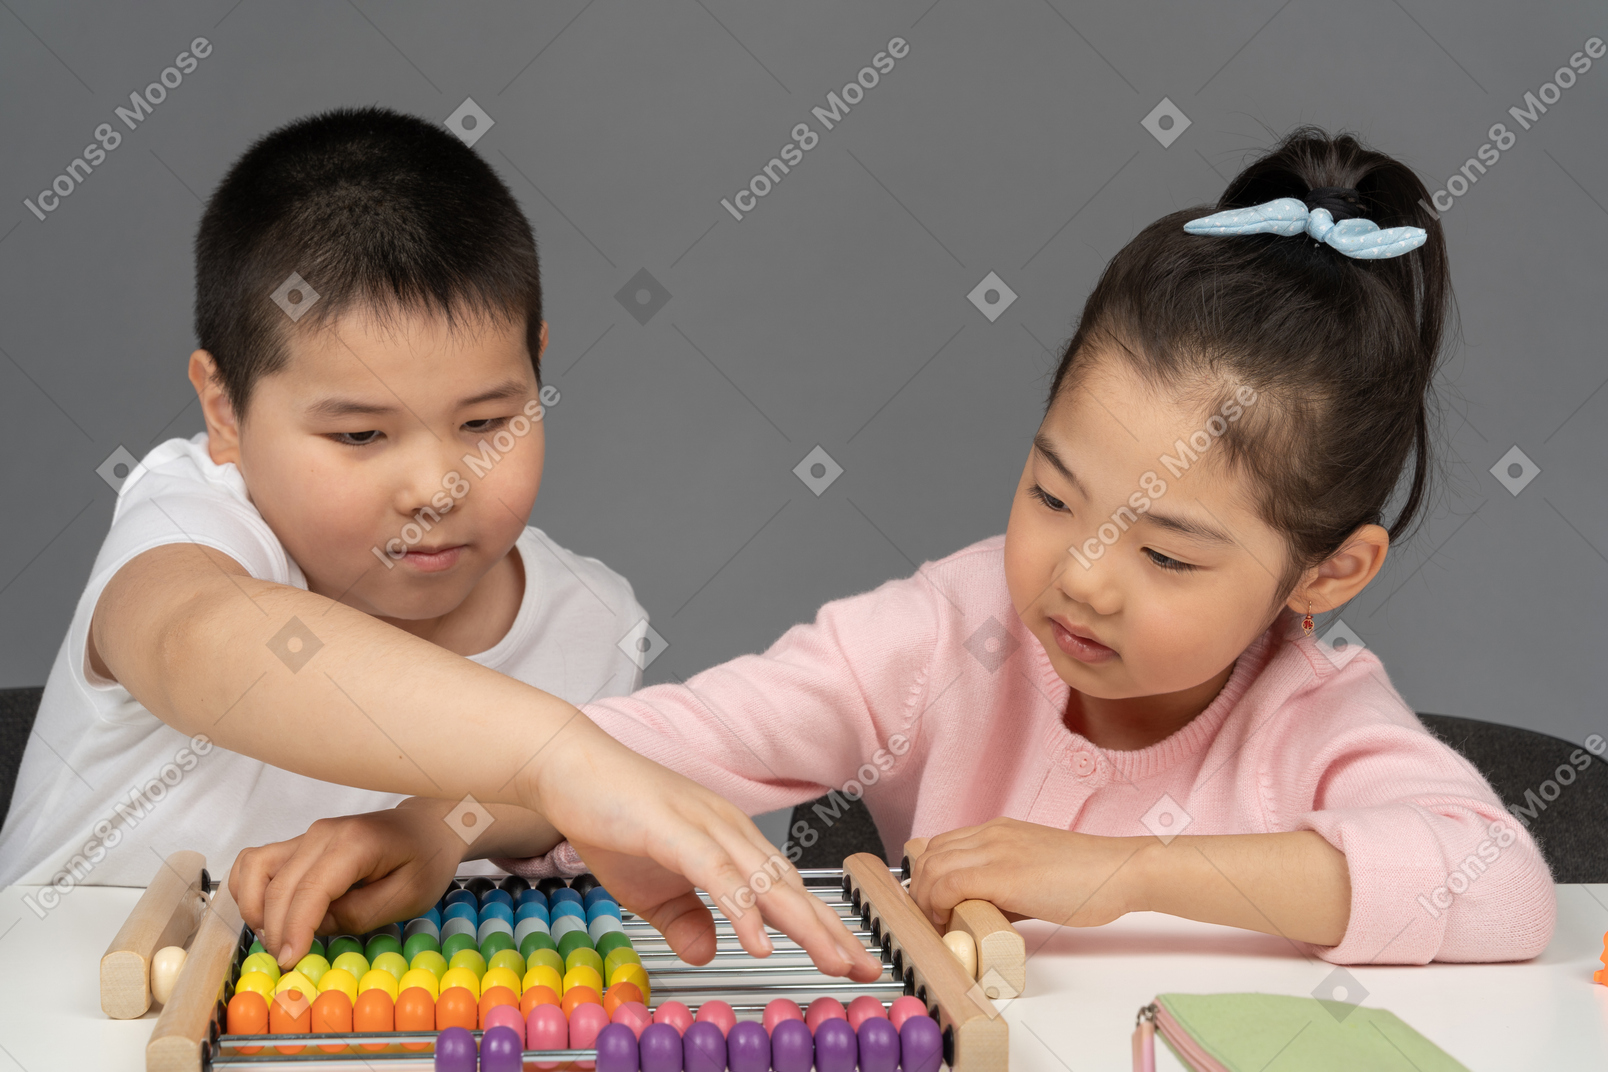 Boy and girl playing with an abacus